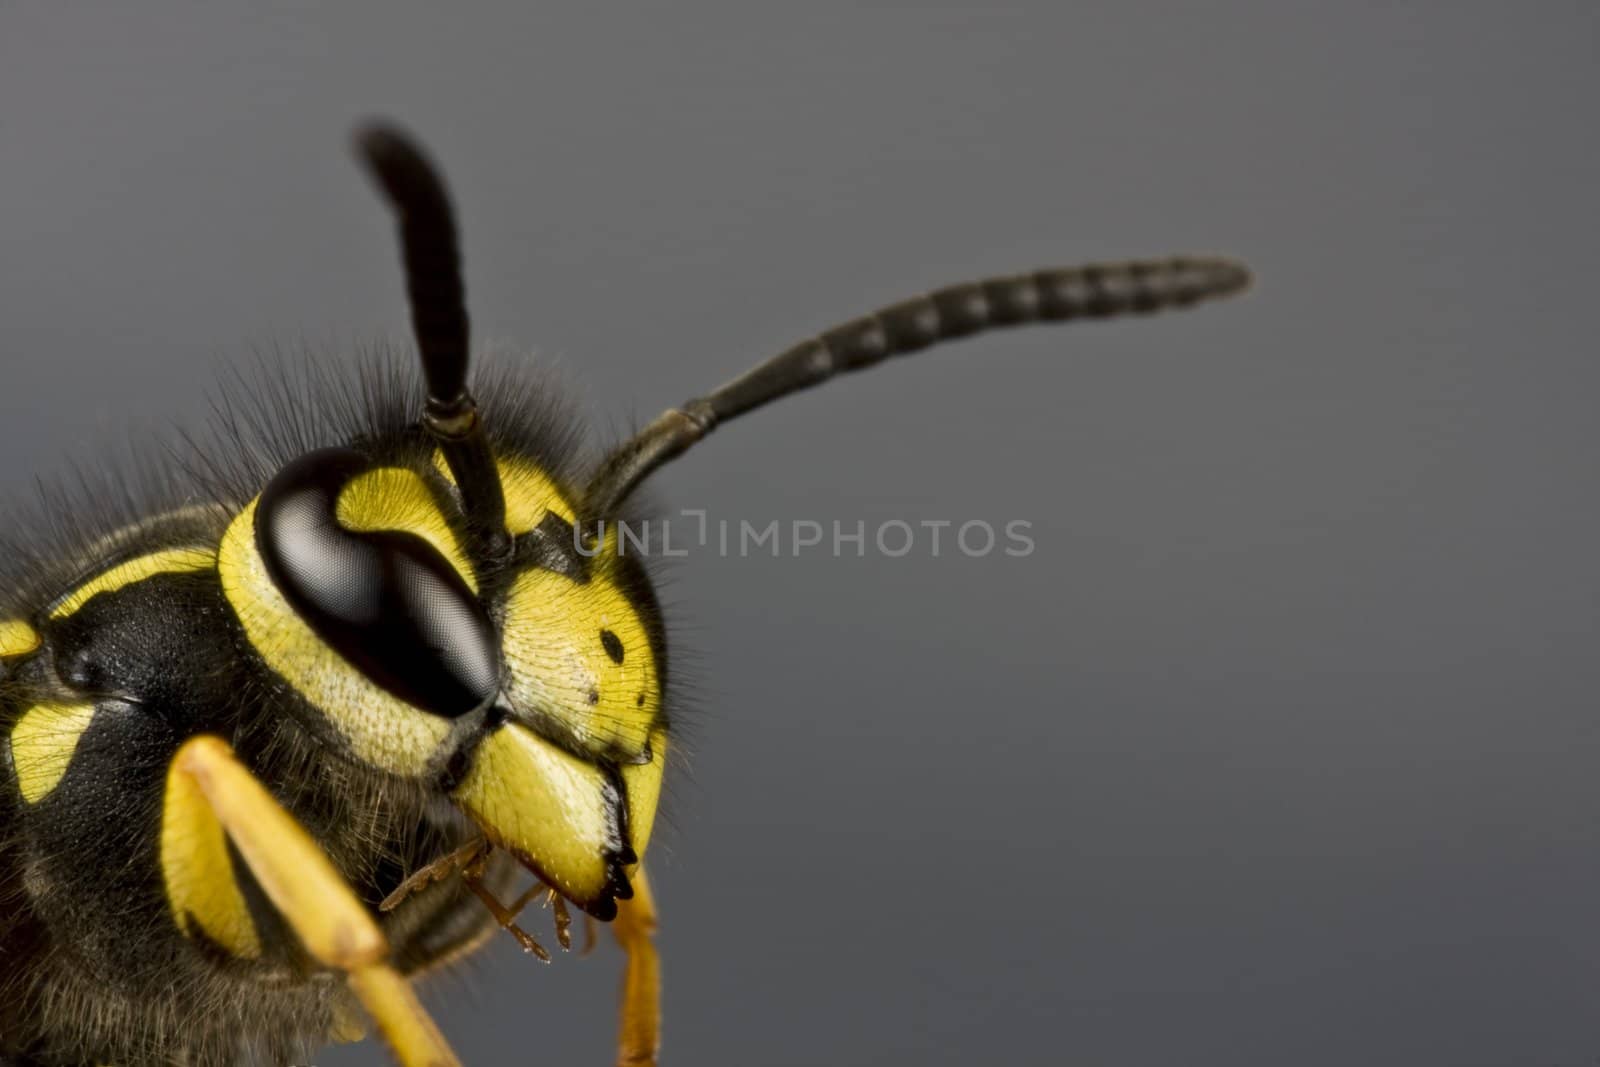 head of wasp in extreme close up with neutral background. Copyspace under and over antenna.